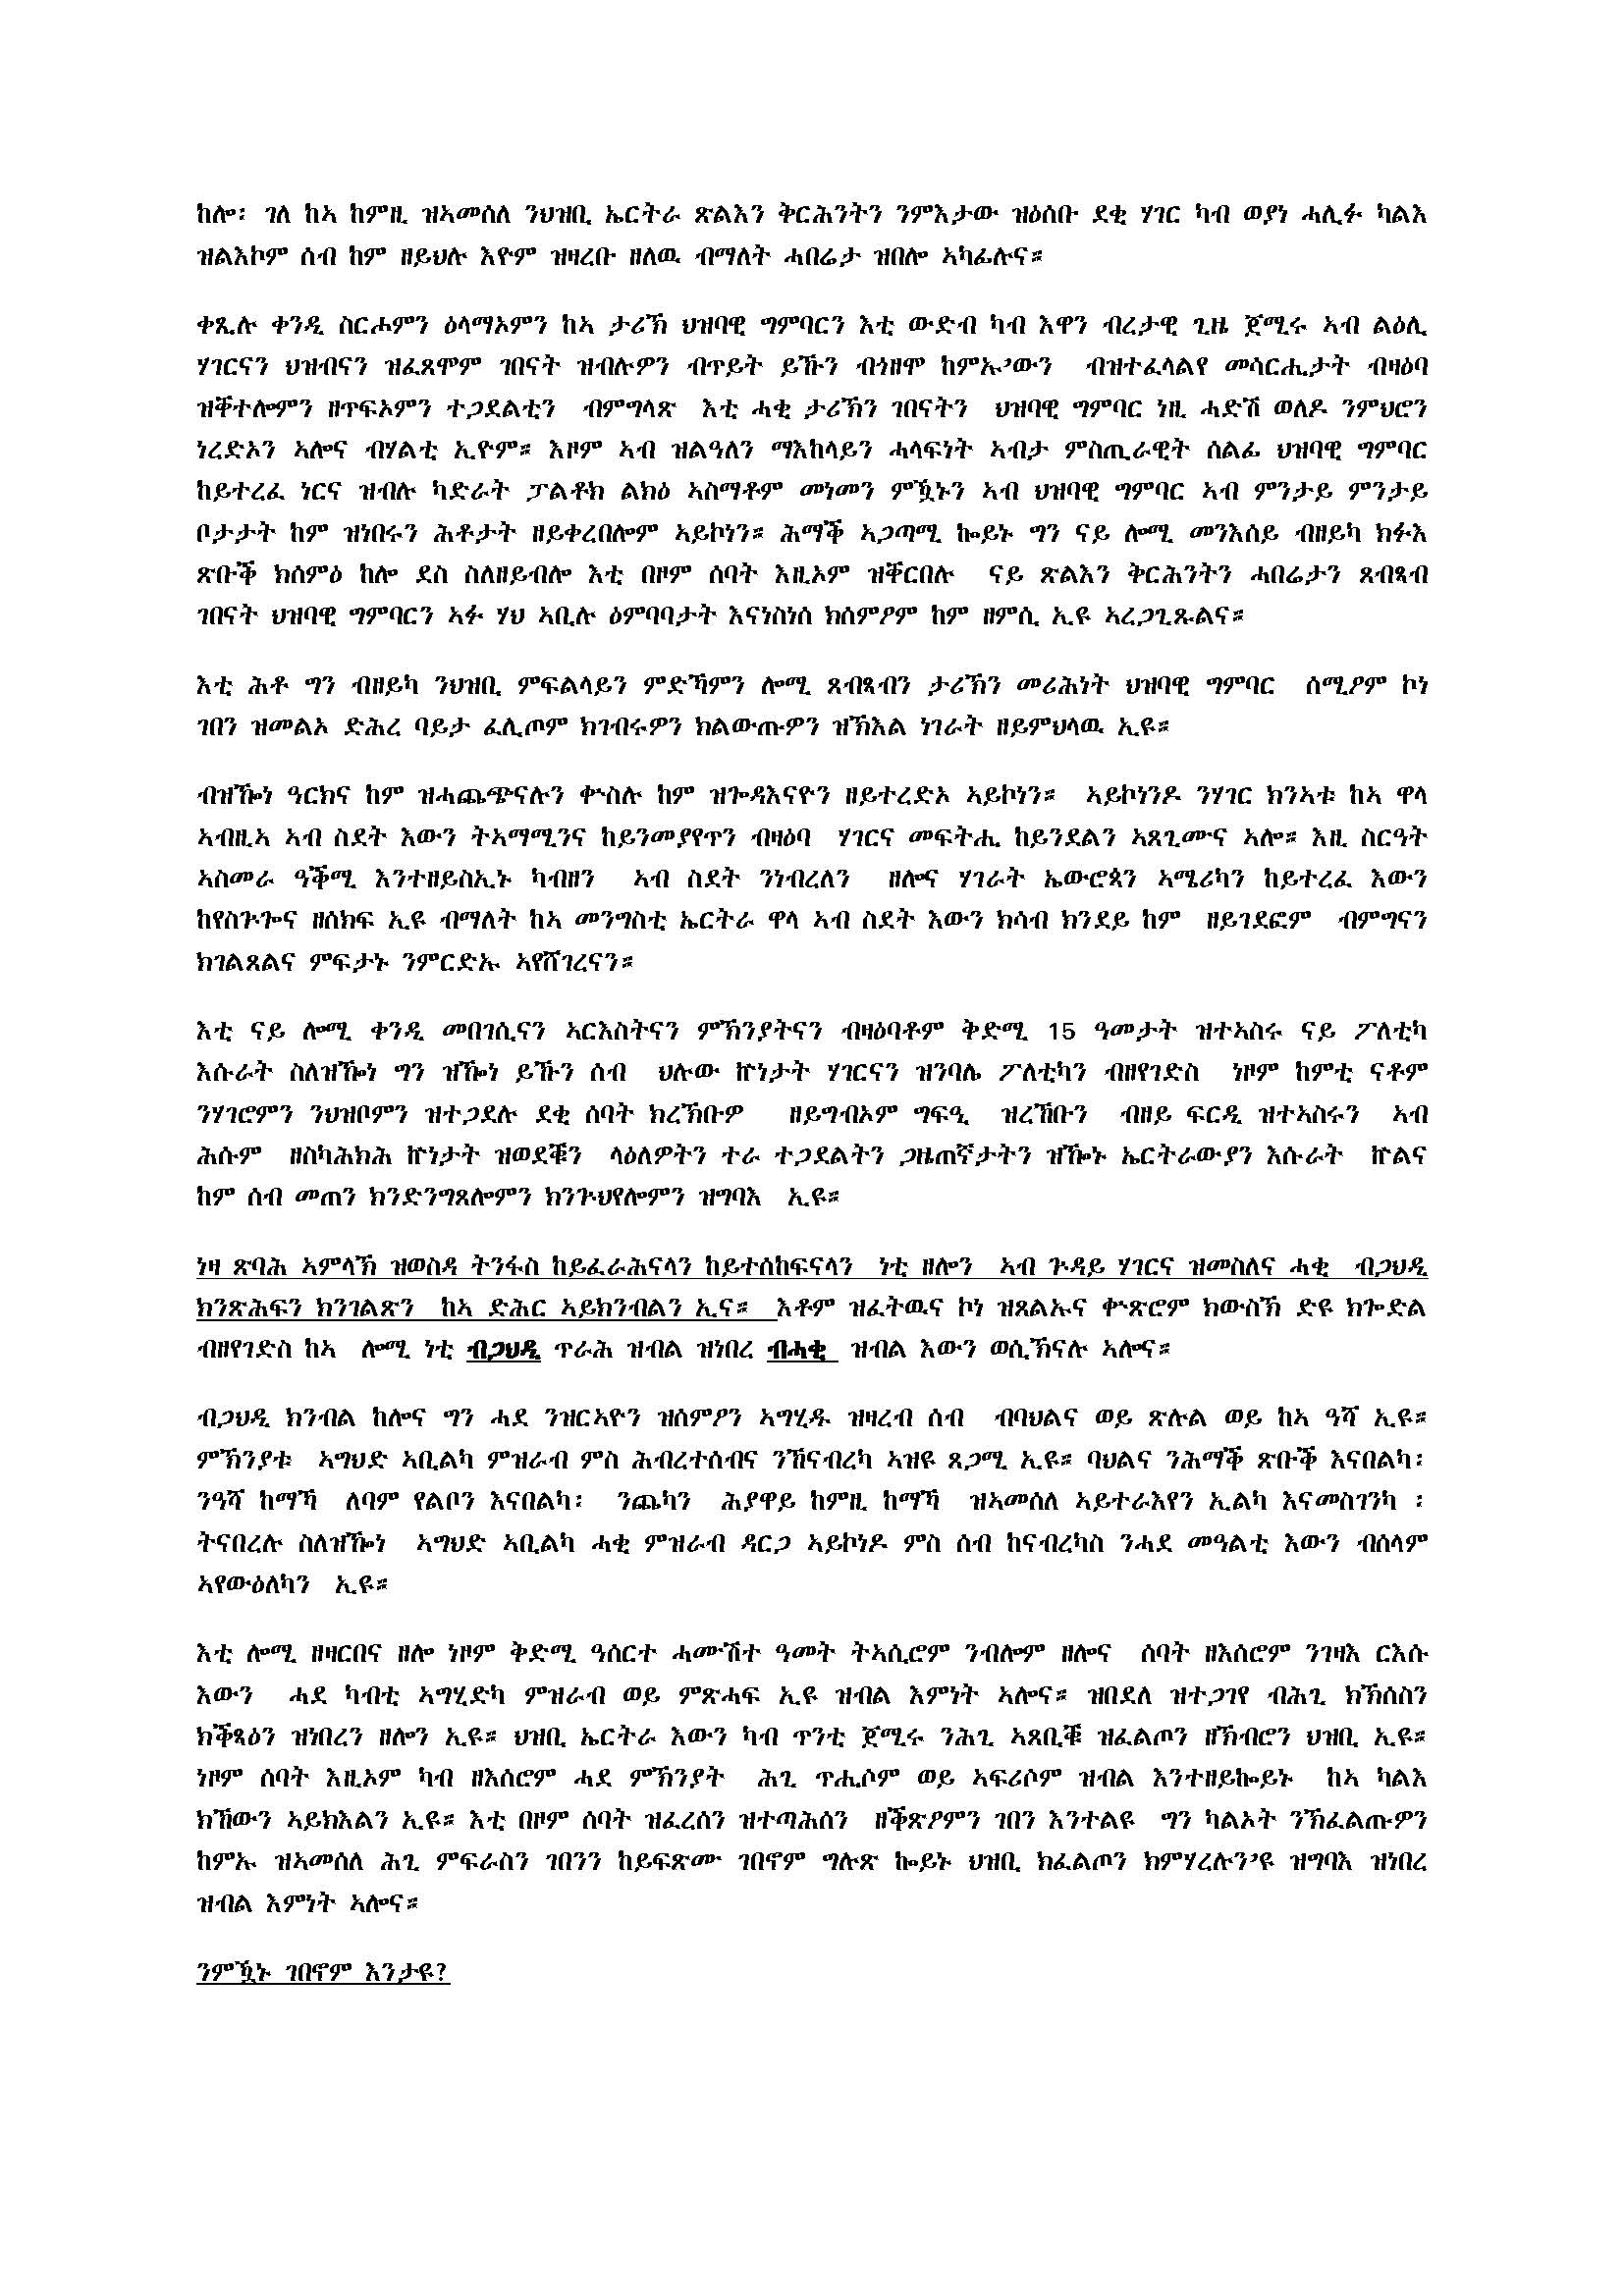 eritrean-opposition-and-demands3_page_2